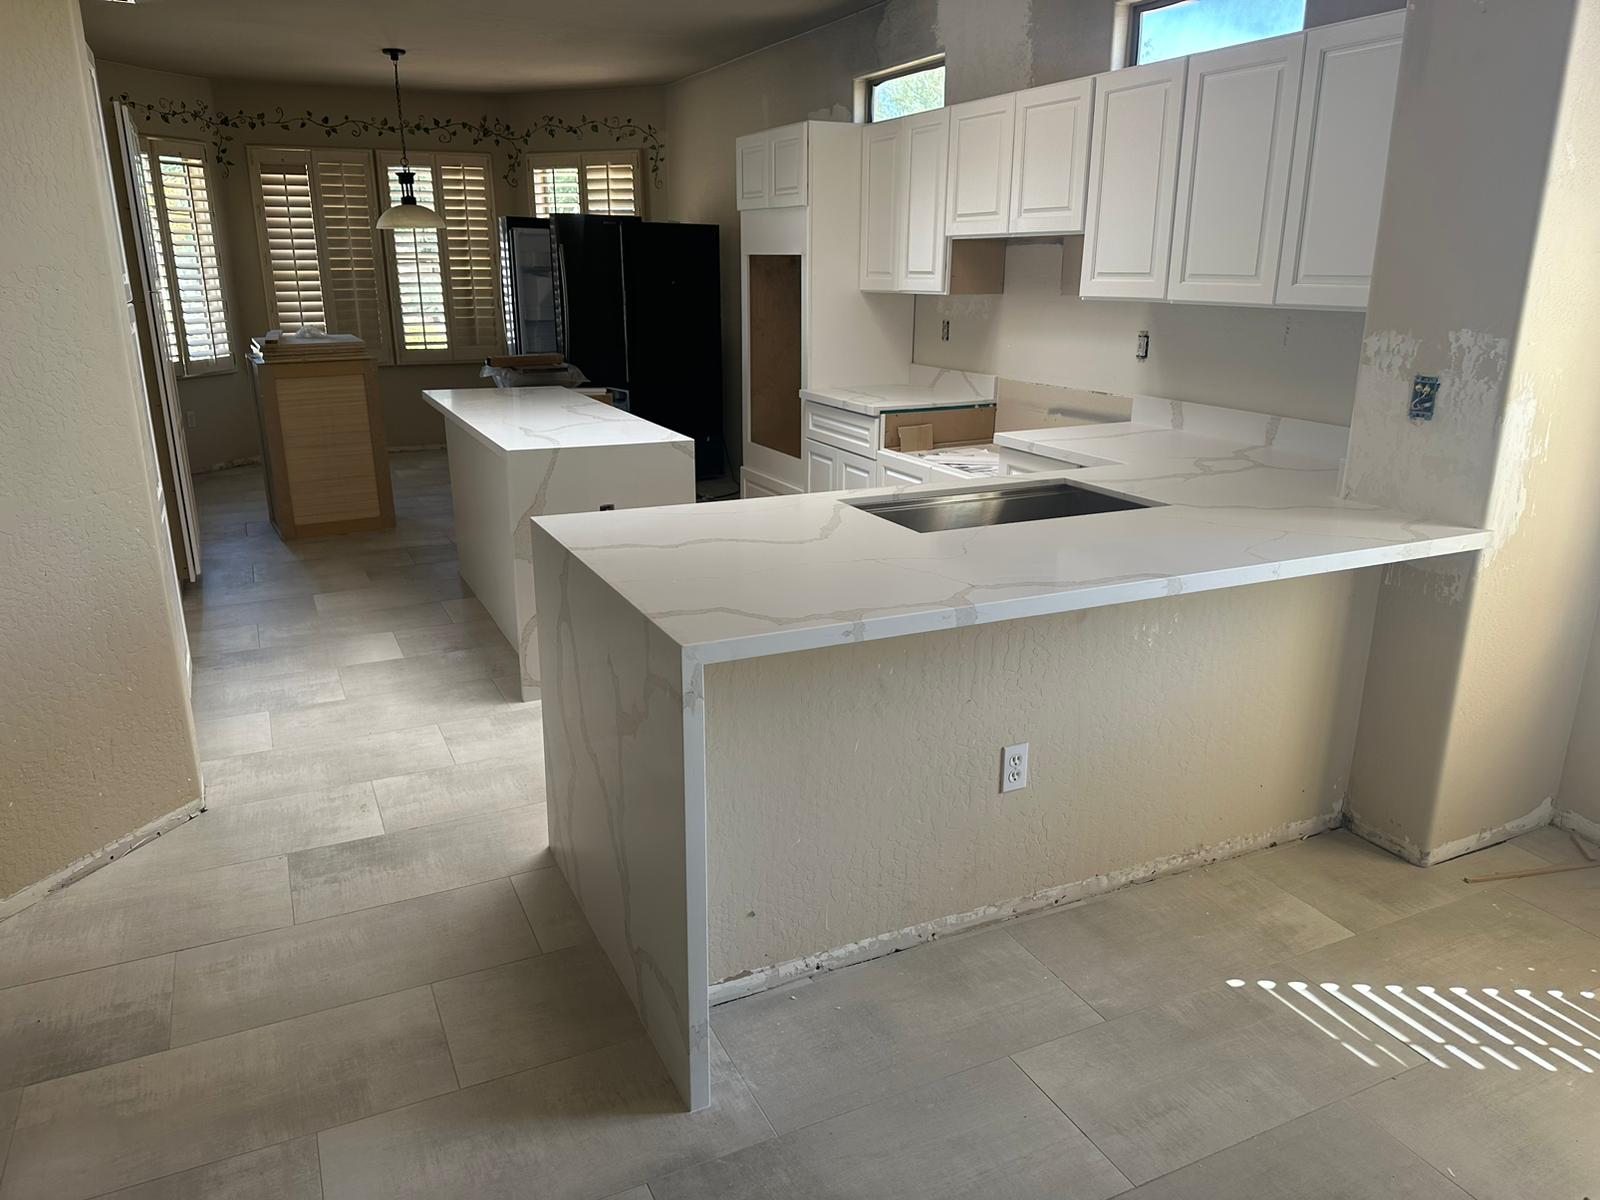 Kitchen and Bath Remodeling Queen Creek